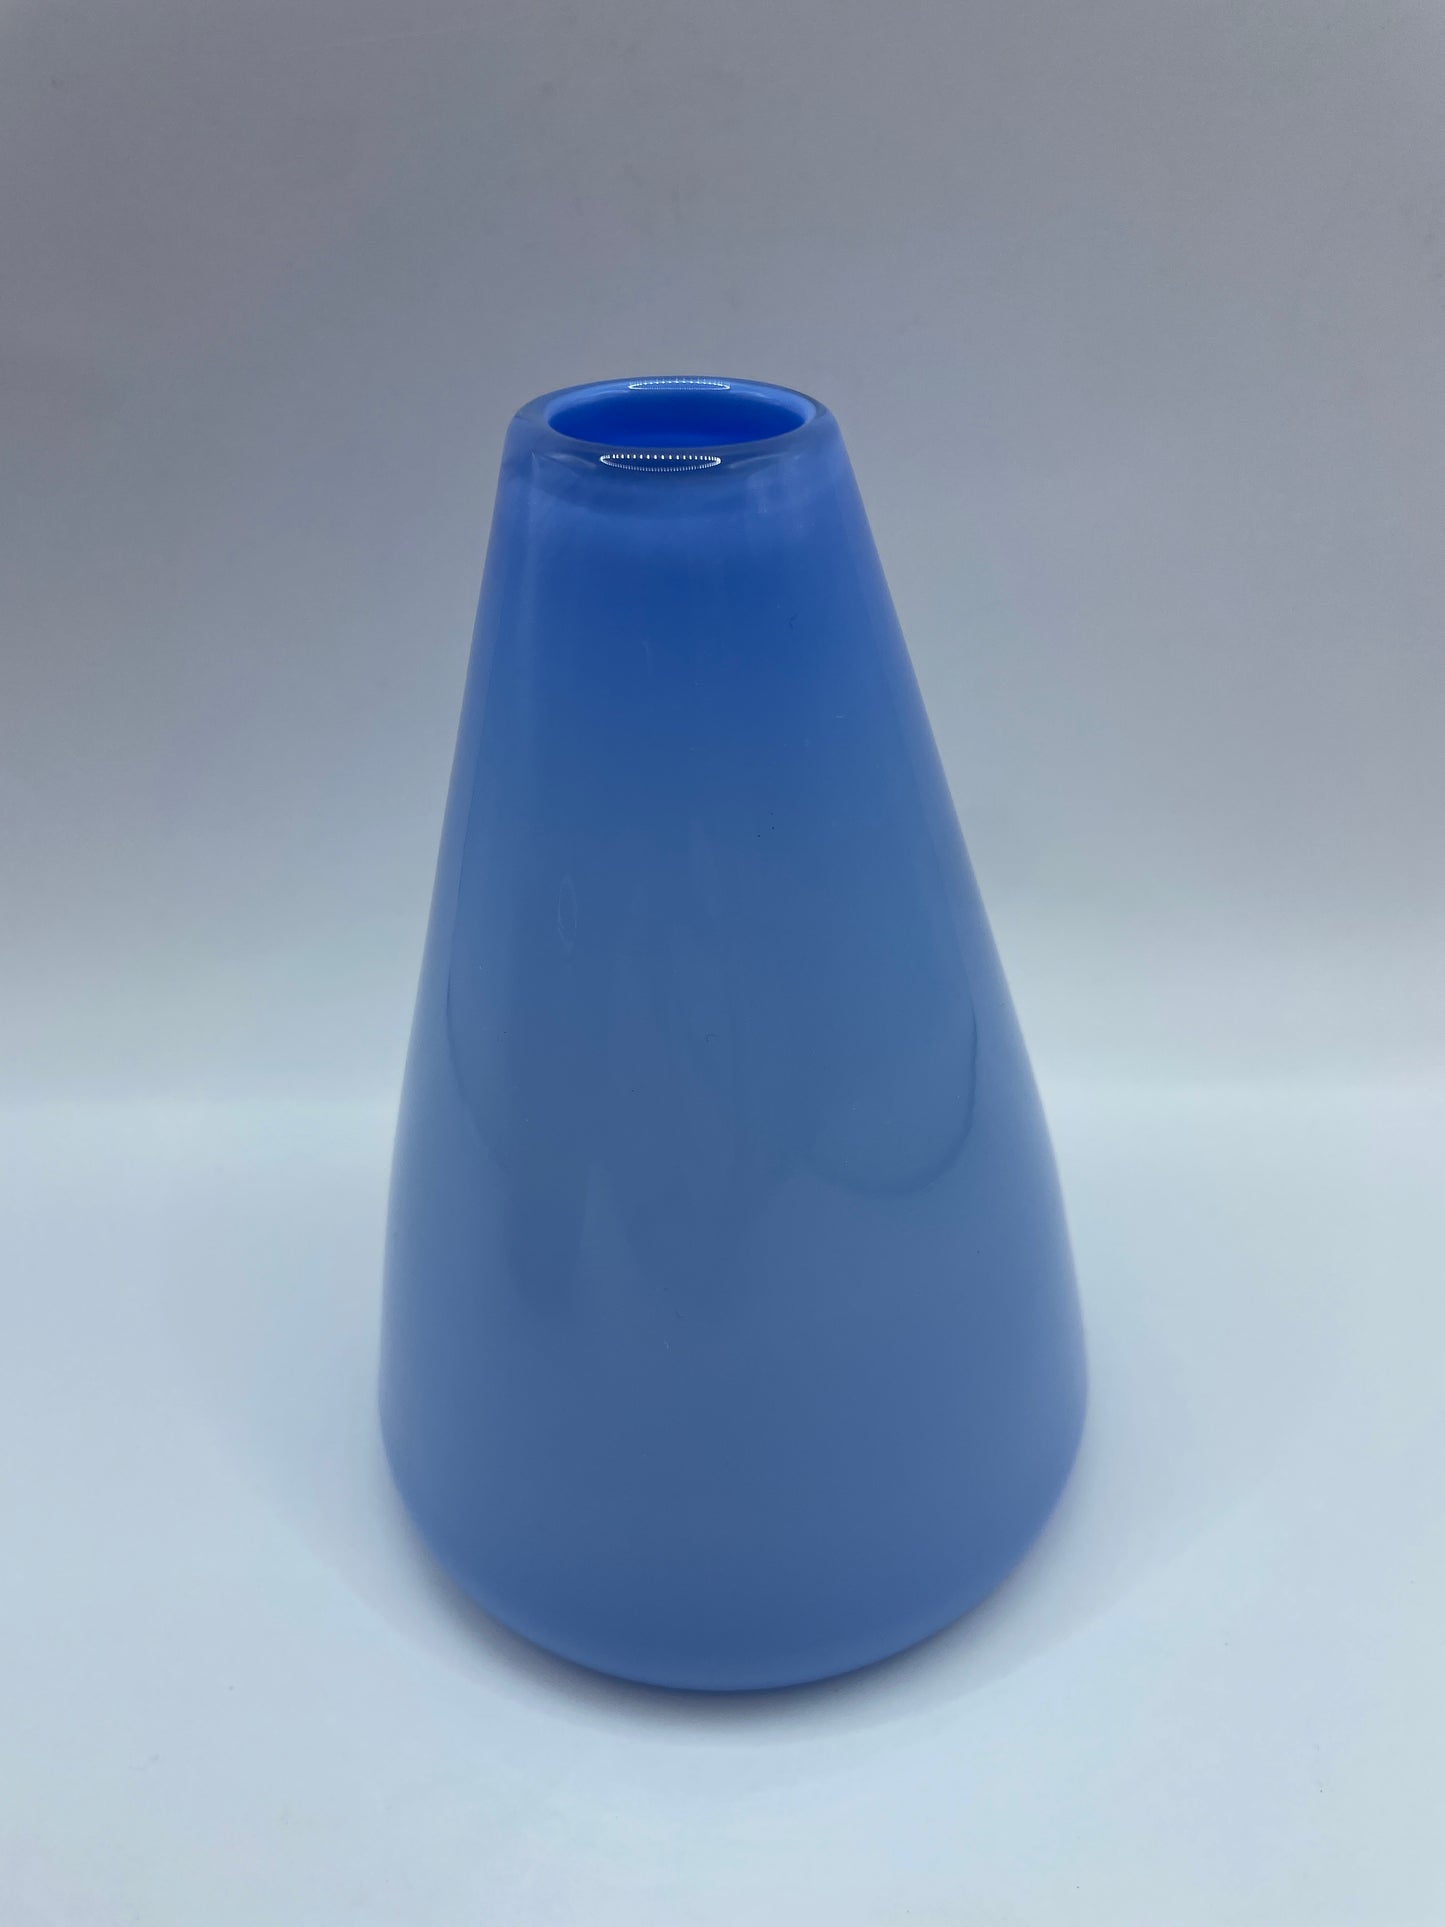 Monmouth Glass bud vase (hand blown glass)